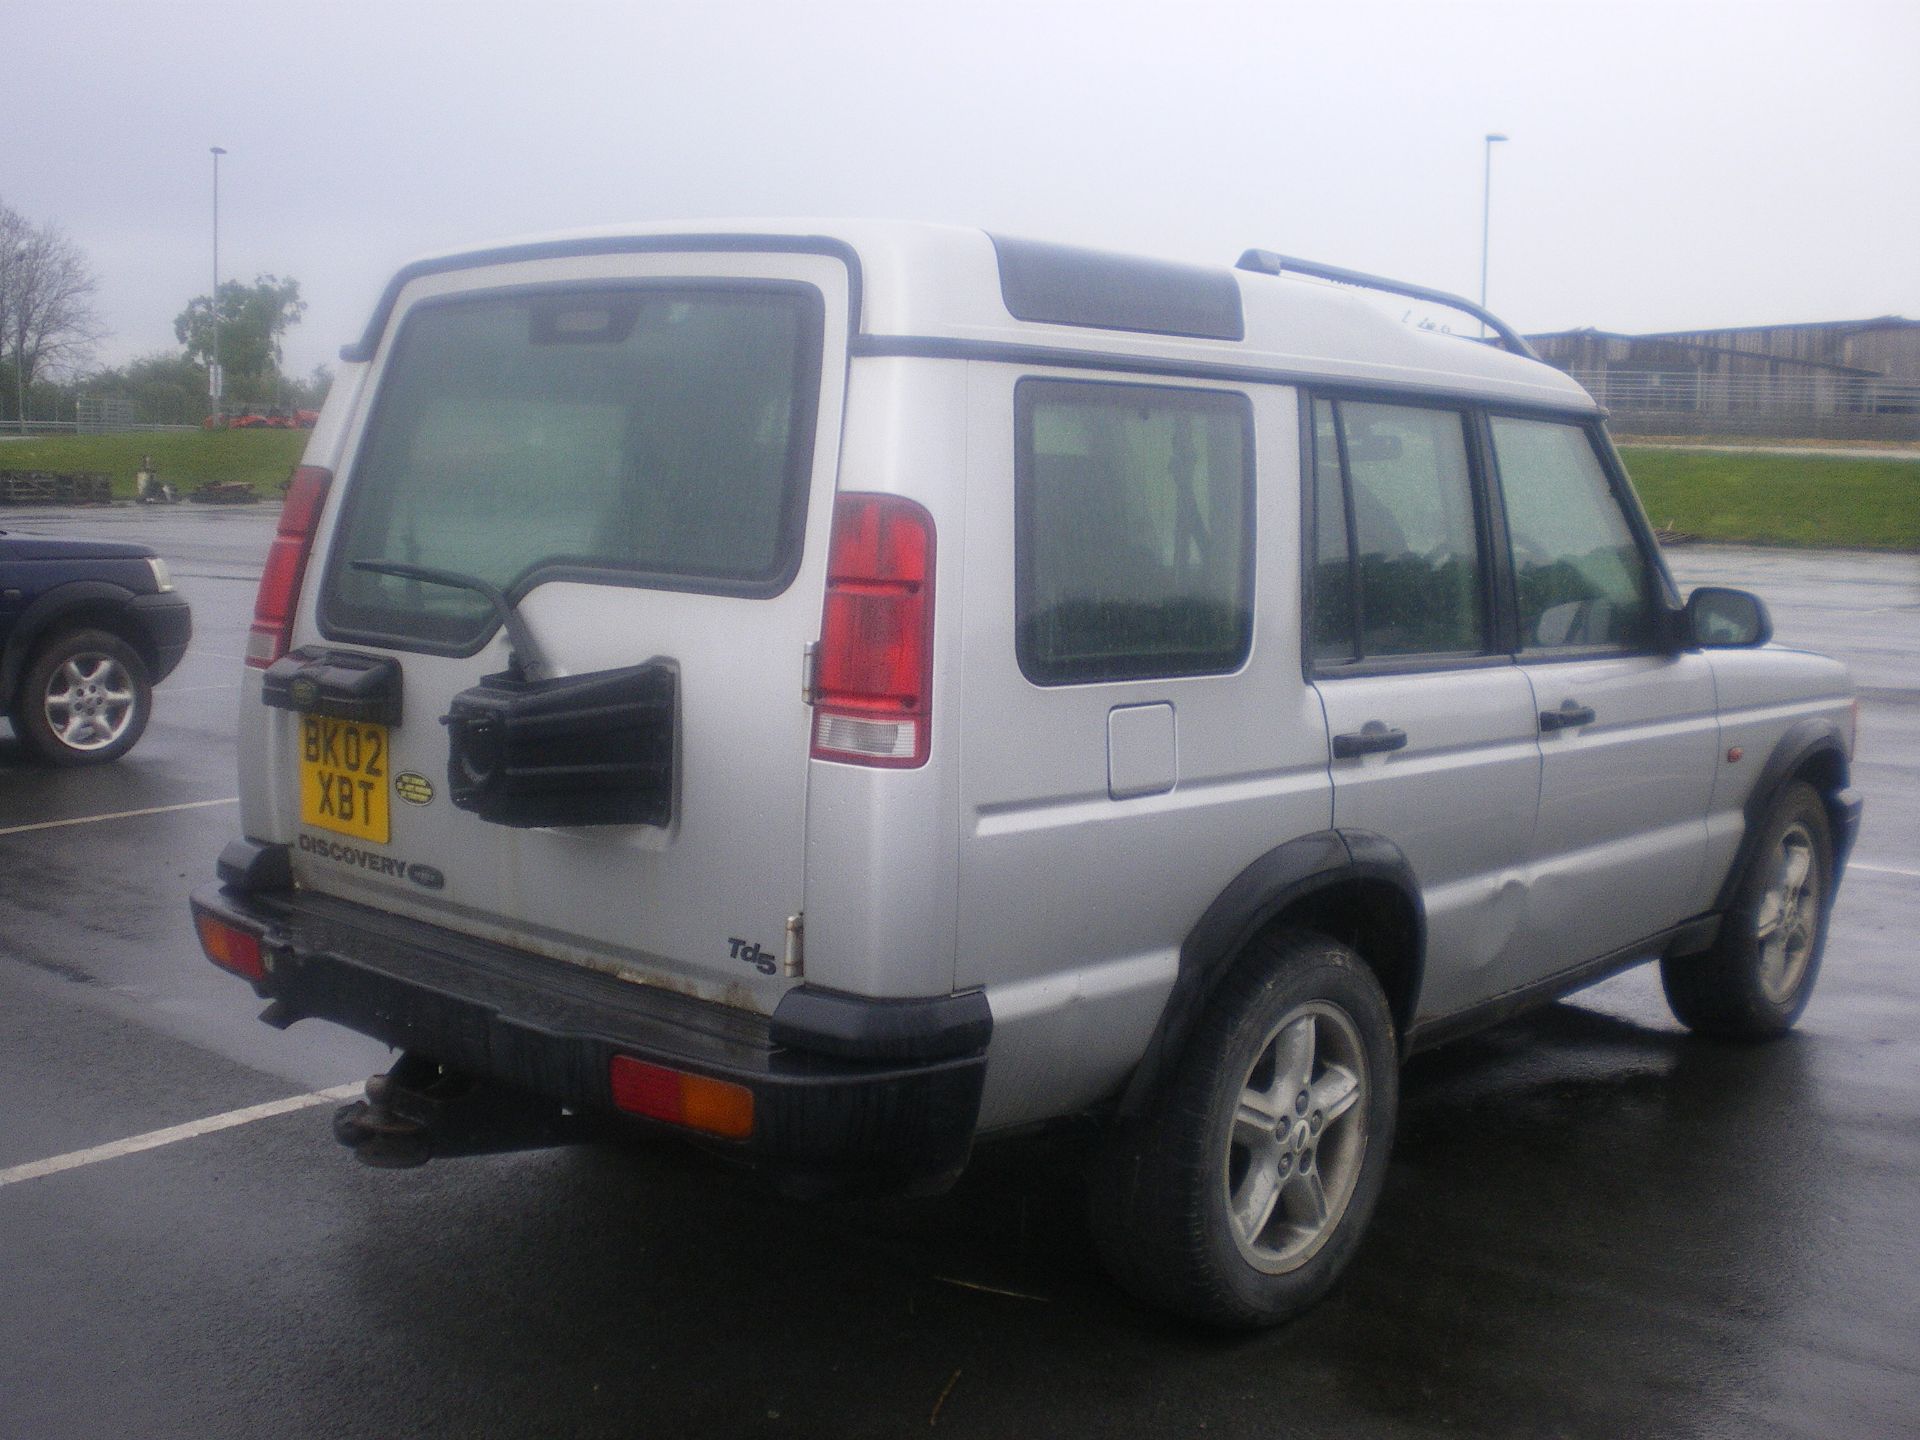 LANDROVER DISCOVERY 2002 - Image 3 of 3